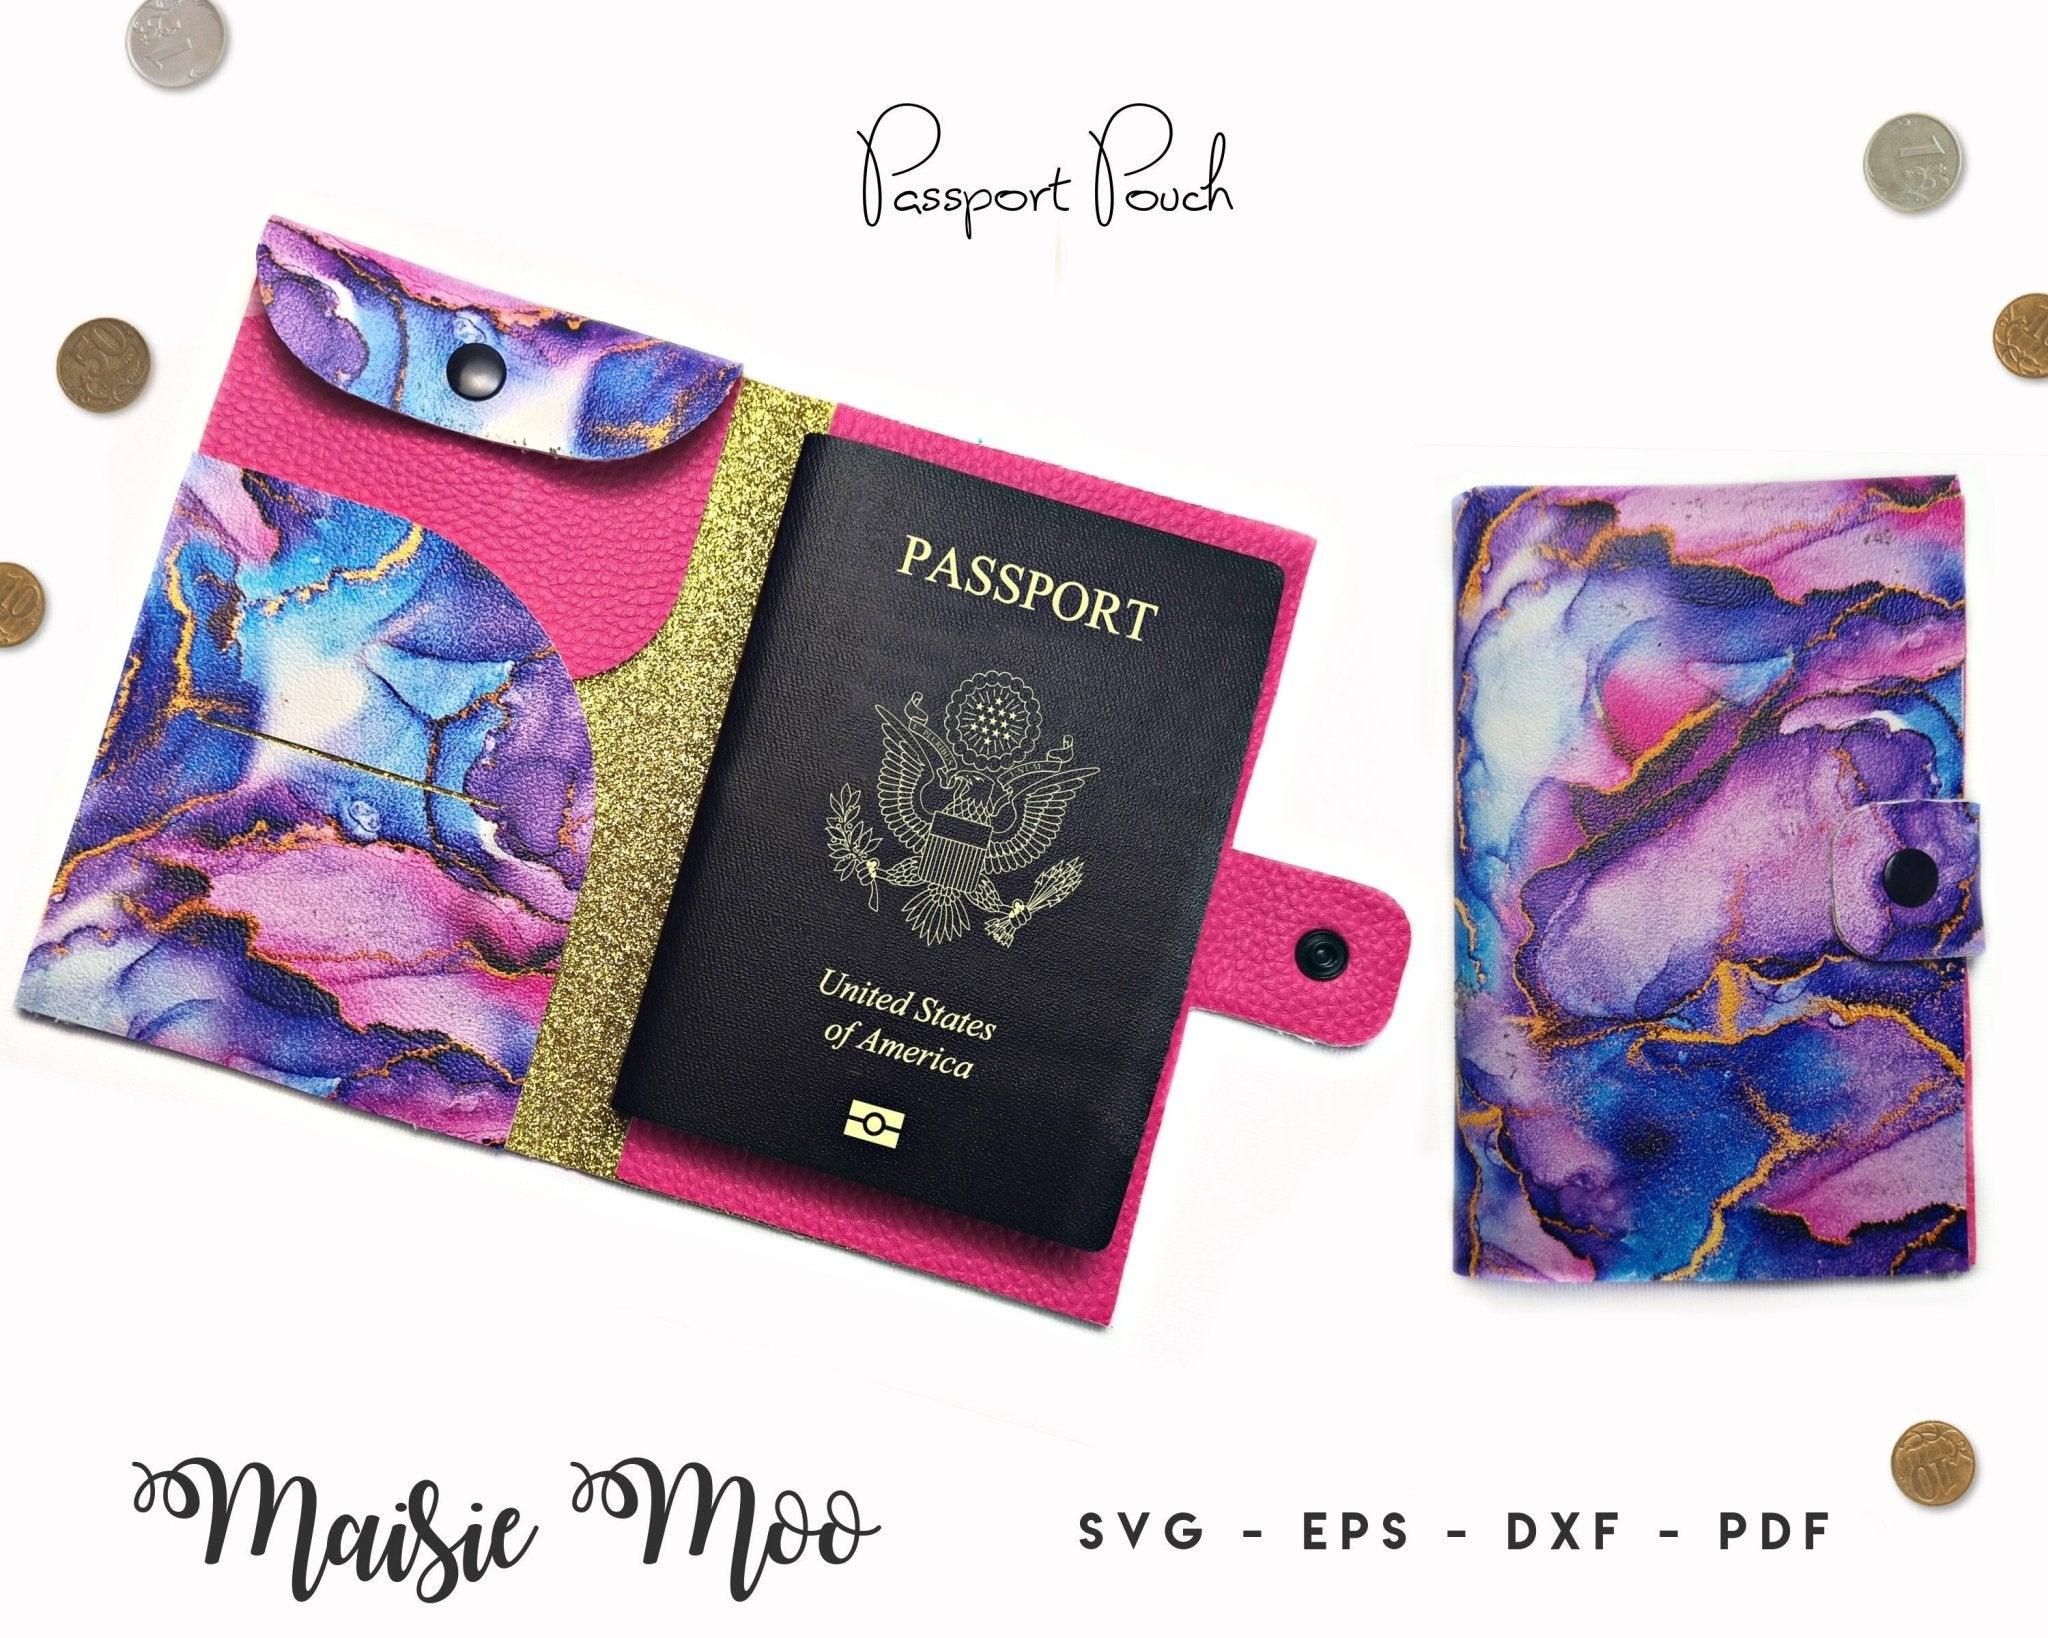 Meow! Travel in style with this designer passport holder! ✈️ $18.99